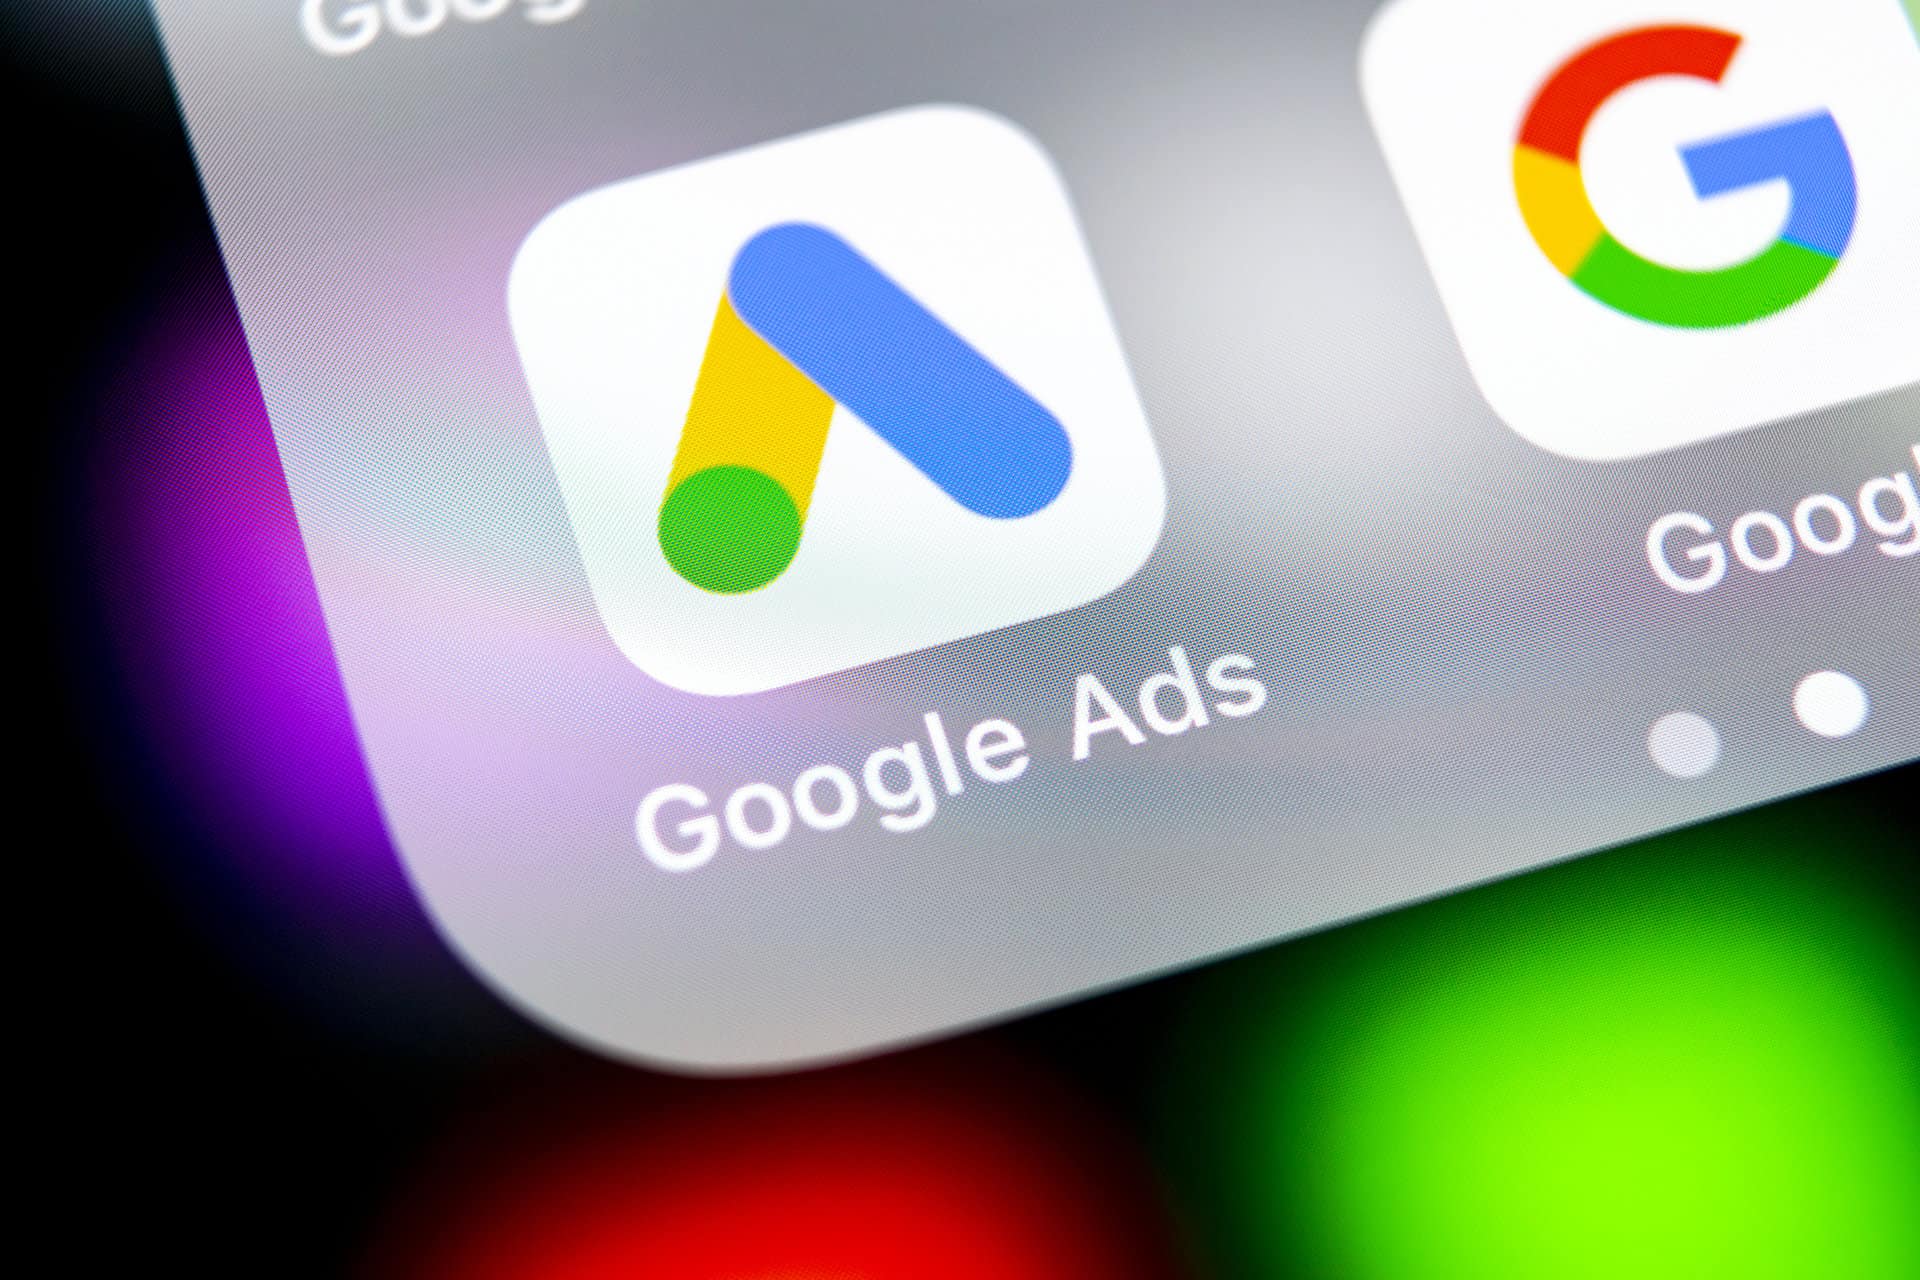 how much do google ads cost